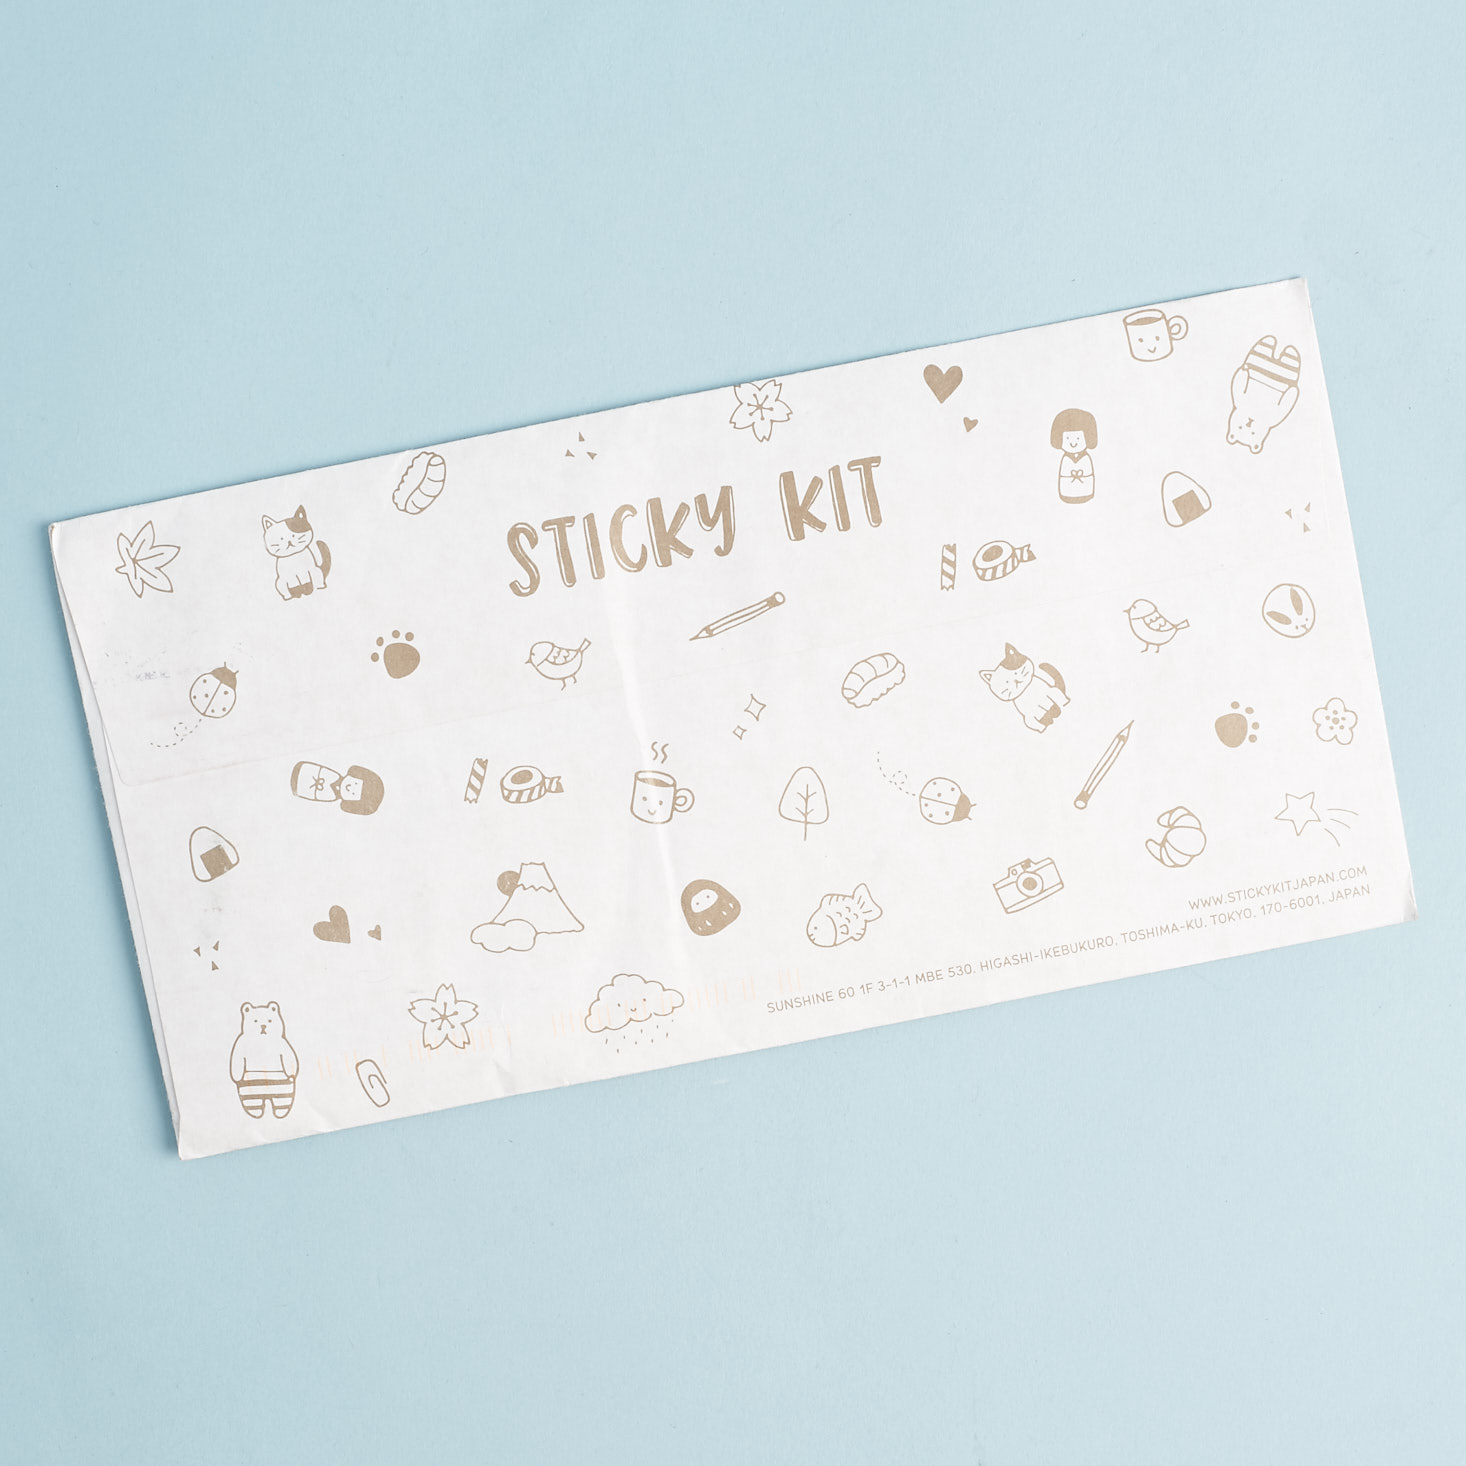 Sticky Kit Sticker Subscription Review + Coupon – August 2017